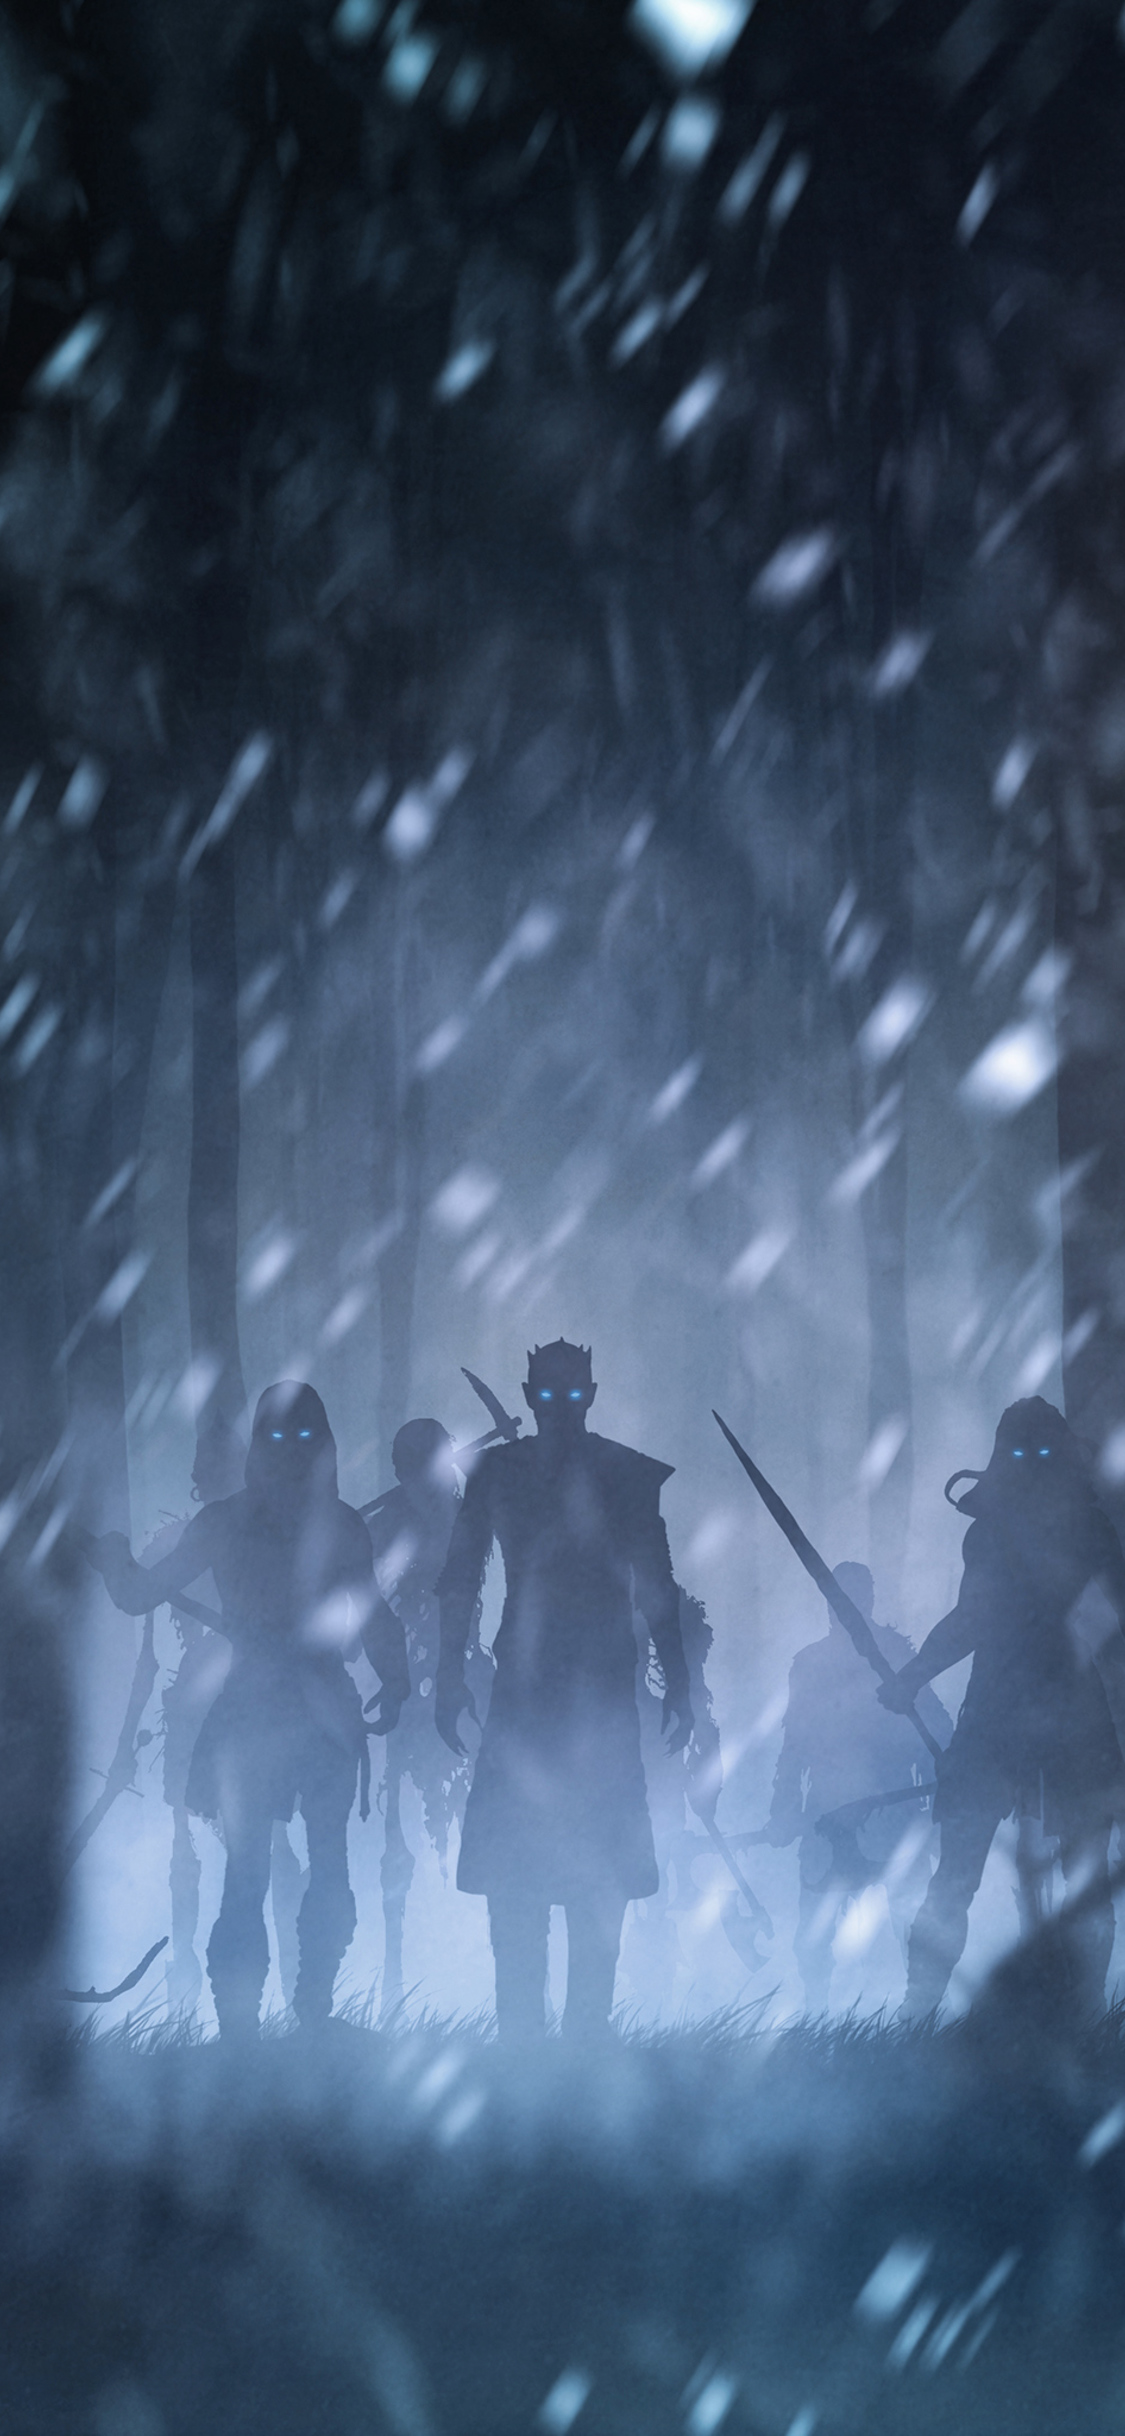 night-king-with-white-walkers-artwork iPhone game of thrones wallpaper